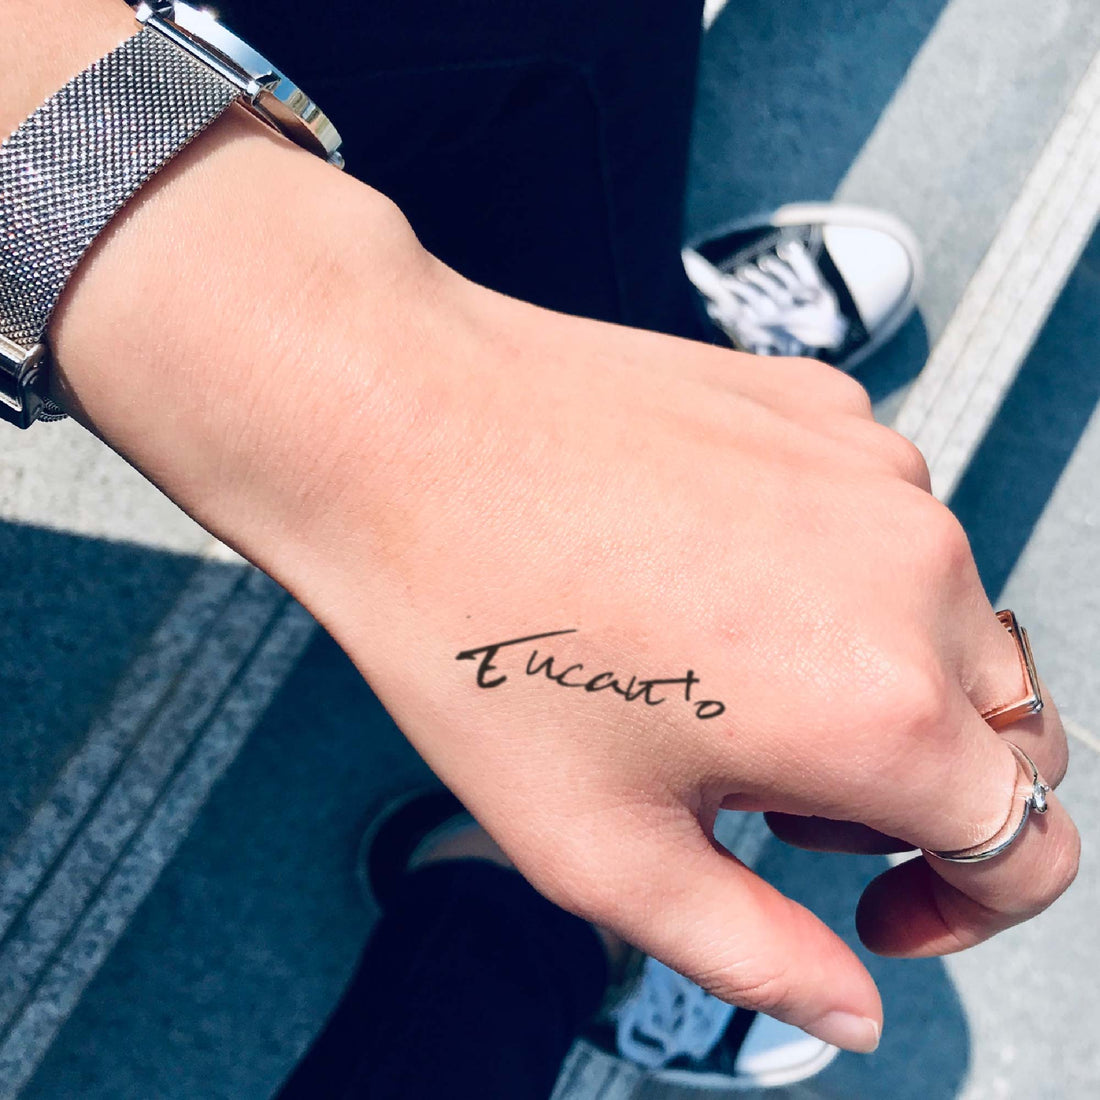 Encanto custom temporary tattoo sticker design idea inspiration meanings removal arm wrist hand words font name signature calligraphy lyrics tour concert outfits merch accessory gift souvenir costumes wear dress up code